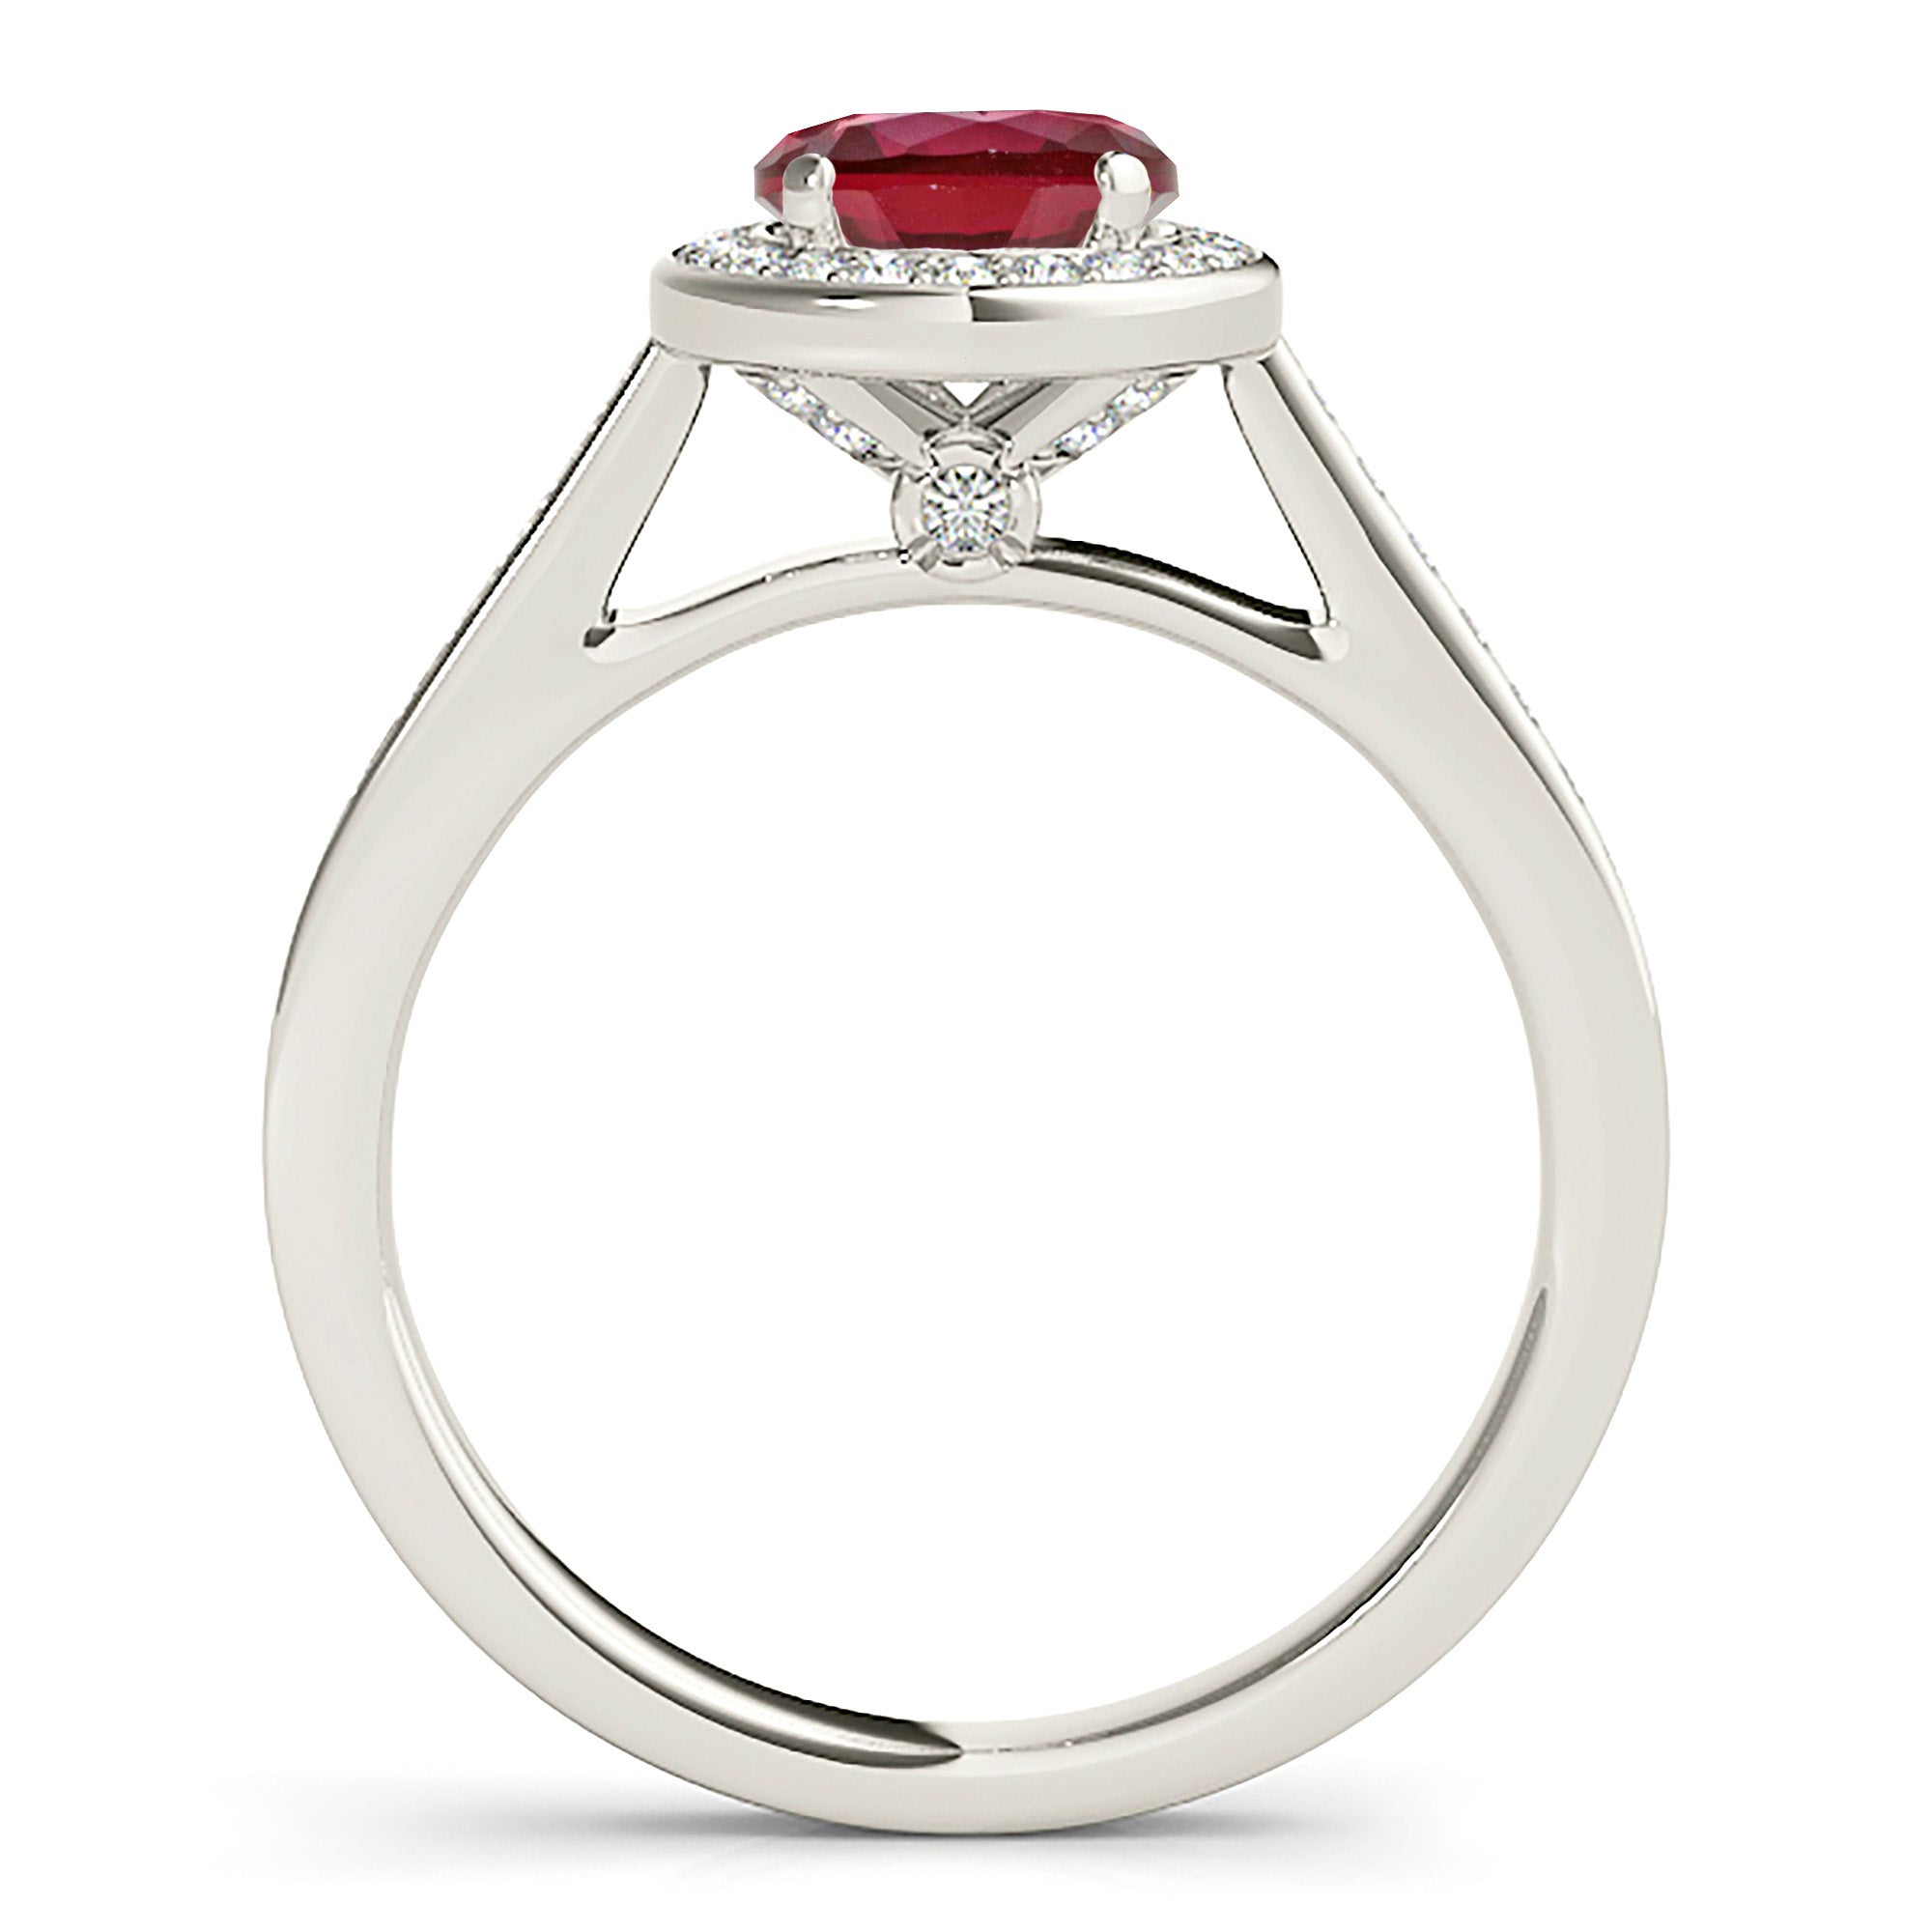 1.35 ct. Genuine Ruby Ring With 0.25 ctw. Diamond Halo, Delicate Diamond Band, Underneath Accent Diamond |Ruby Halo Ring | Natural Ruby Ring-in 14K/18K White, Yellow, Rose Gold and Platinum - Christmas Jewelry Gift -VIRABYANI